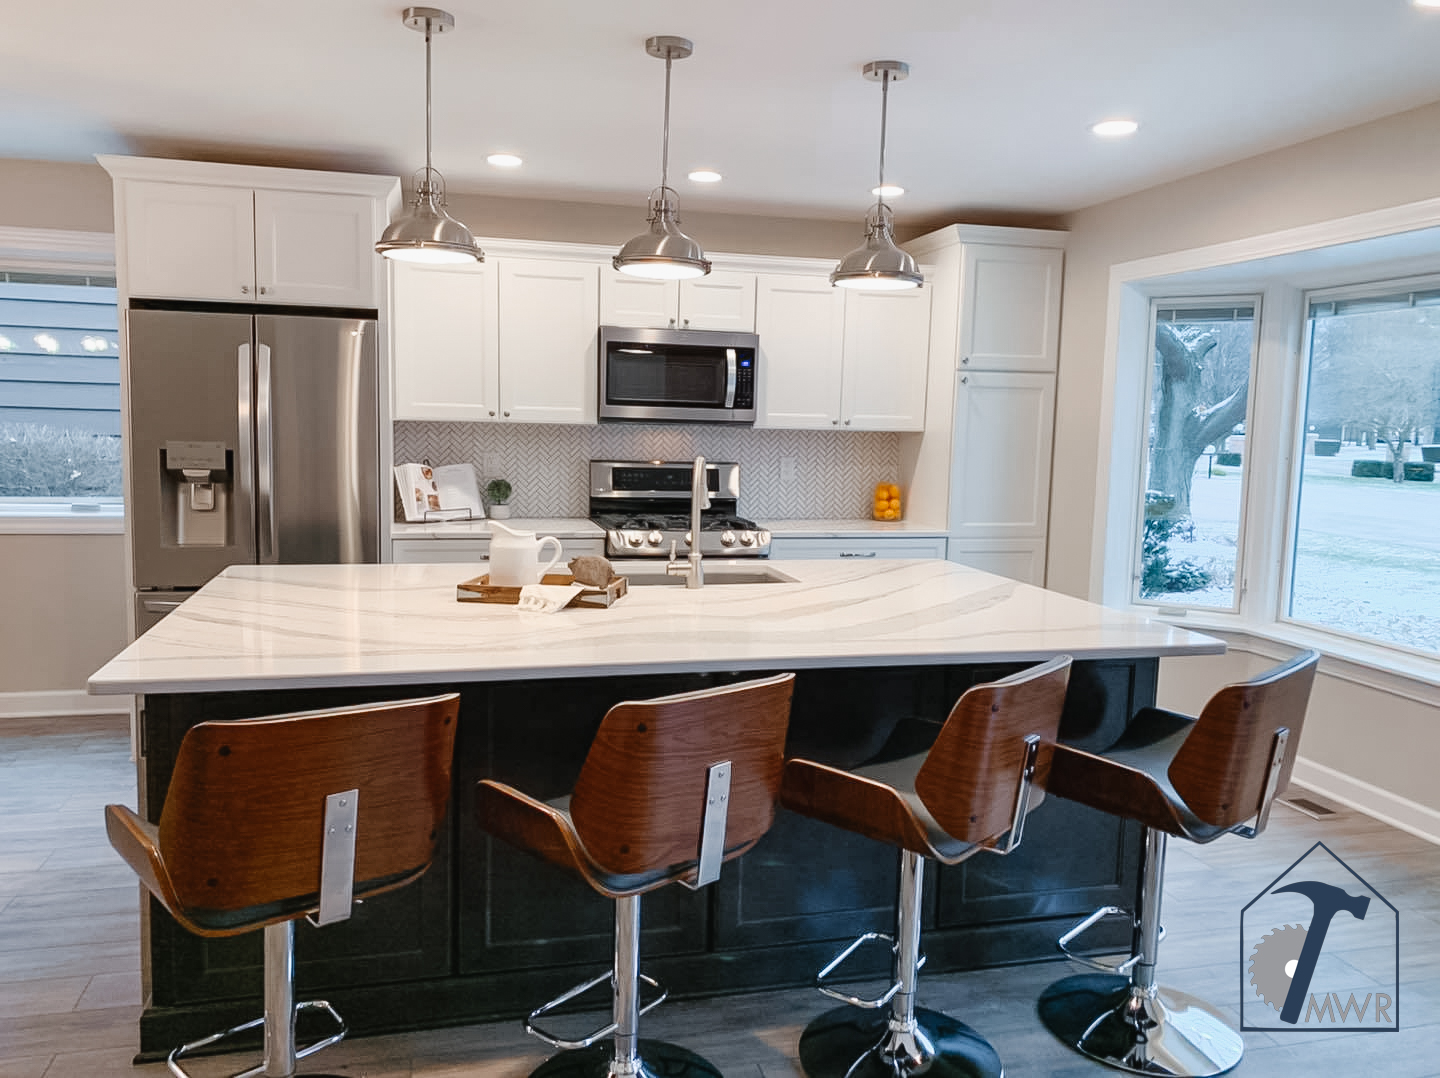 At Midwest Remodel, we bring your dreams to life with our kitchen remodel services.